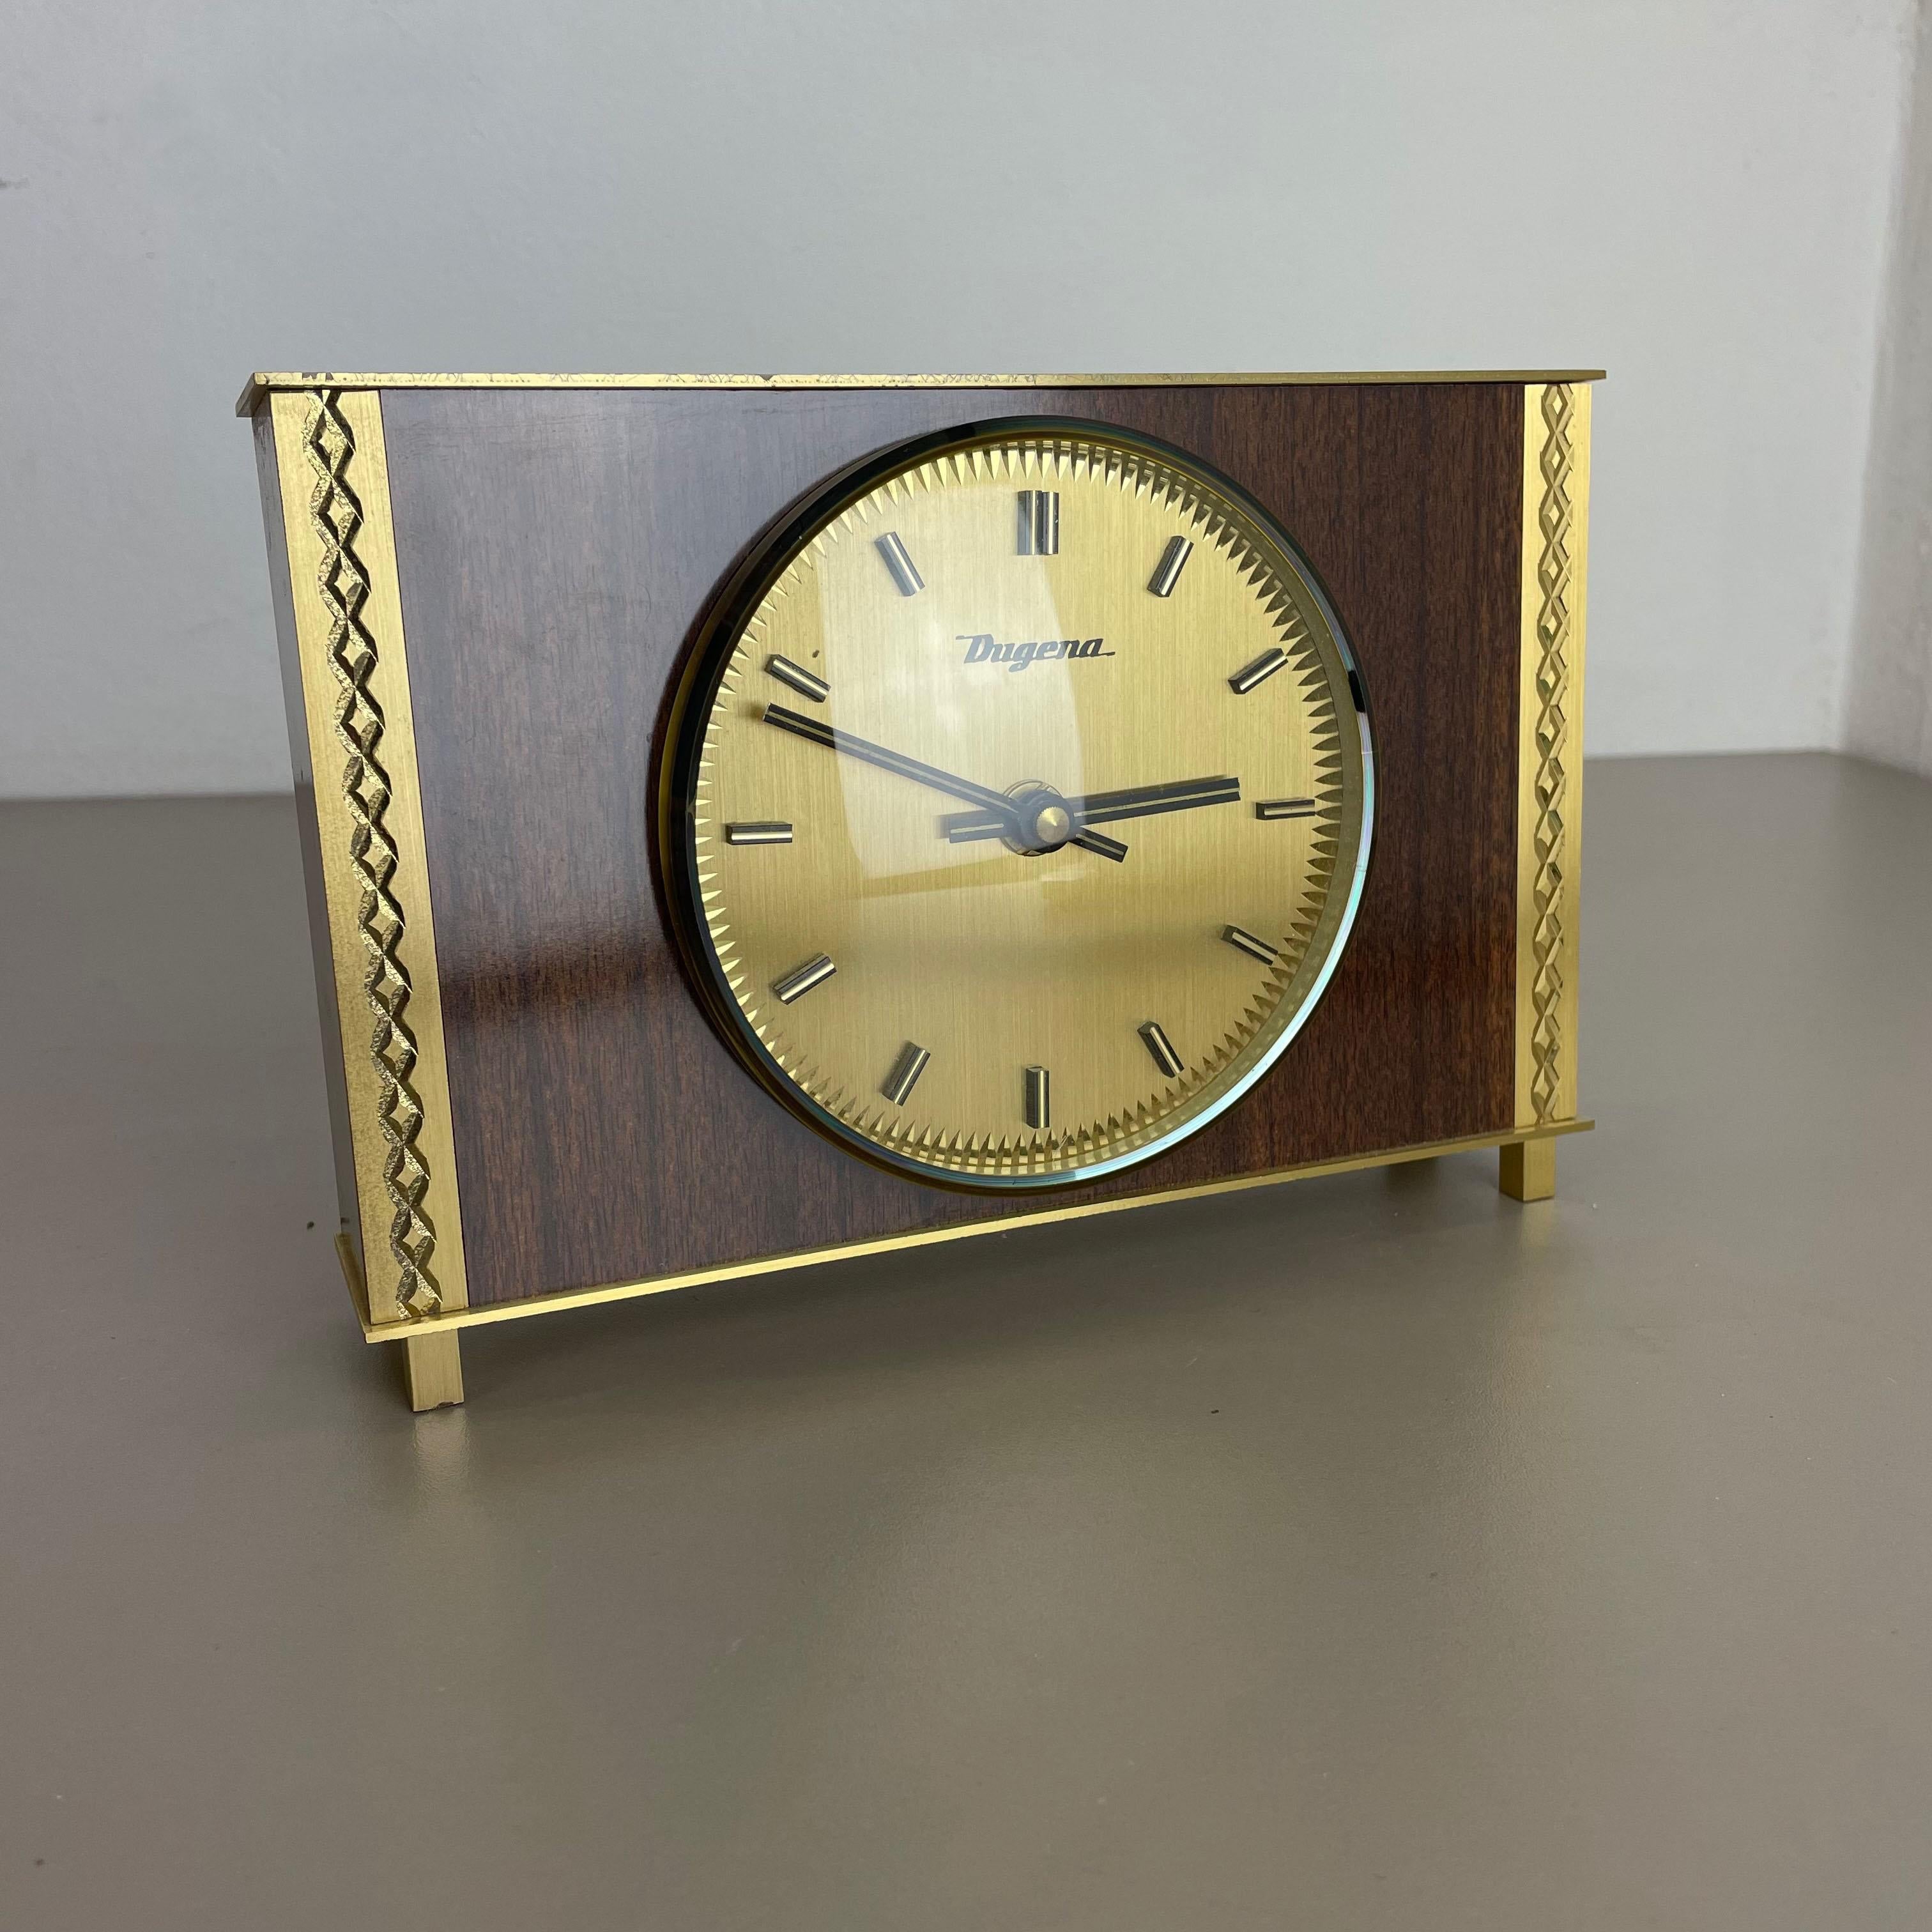 Vintage 1960s Modernist Wooden Teak Brass Table Clock by Dugena, Germany In Good Condition For Sale In Kirchlengern, DE